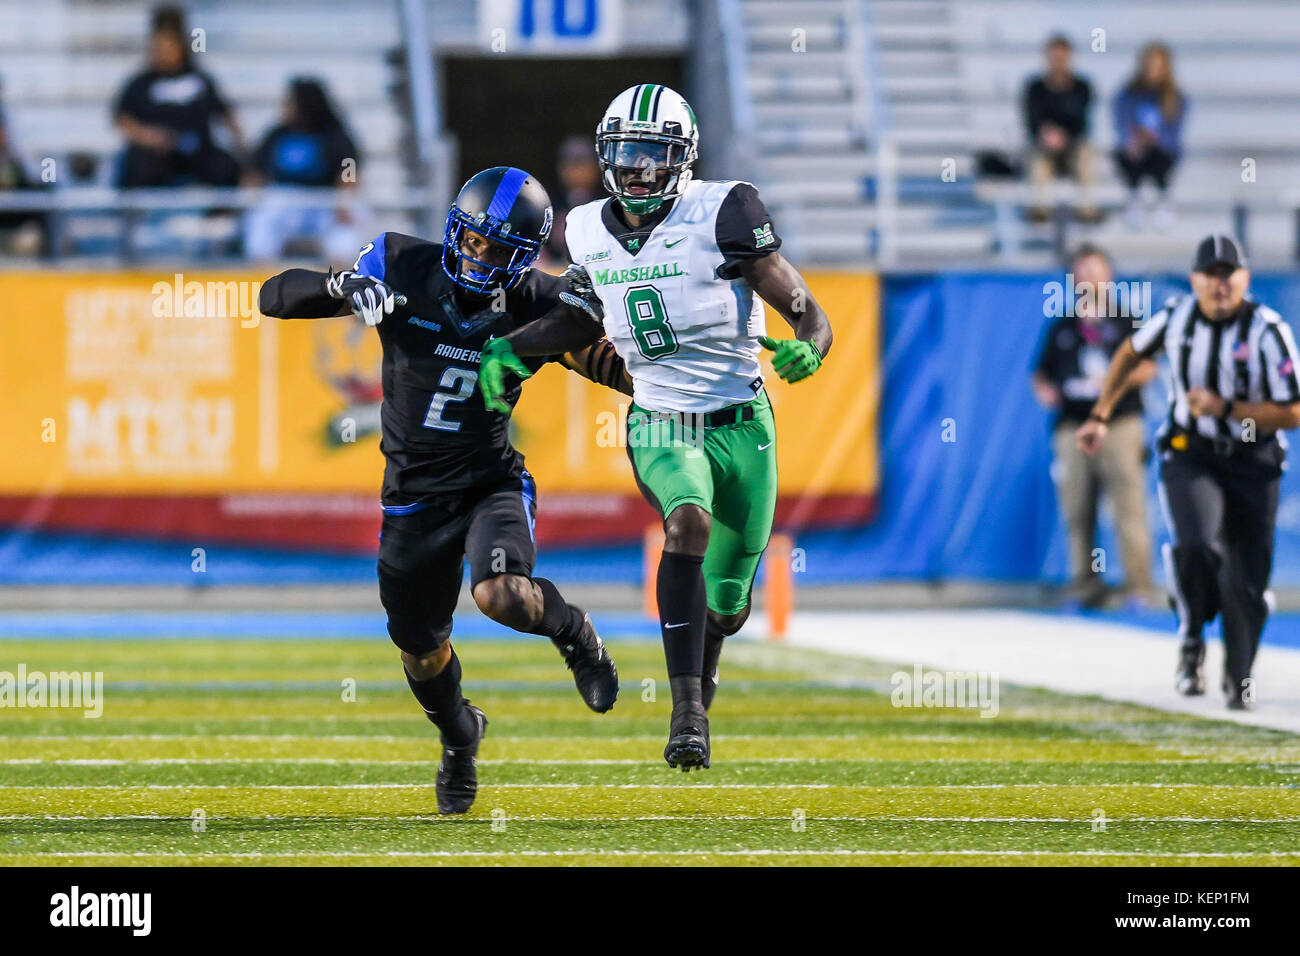 Nashville. 20th Oct, 2017. Marshall wide receiver Tyre Brady (8) attempting a catch on MTSU cornerback Charvarius Ward (2) during the game between Marshall Thundering Herd and MTSU Blue Raiders at Johnny ''Red'' Floyd Stadium in Nashville. TN. Thomas McEwen/CSM/Alamy Live News Stock Photo